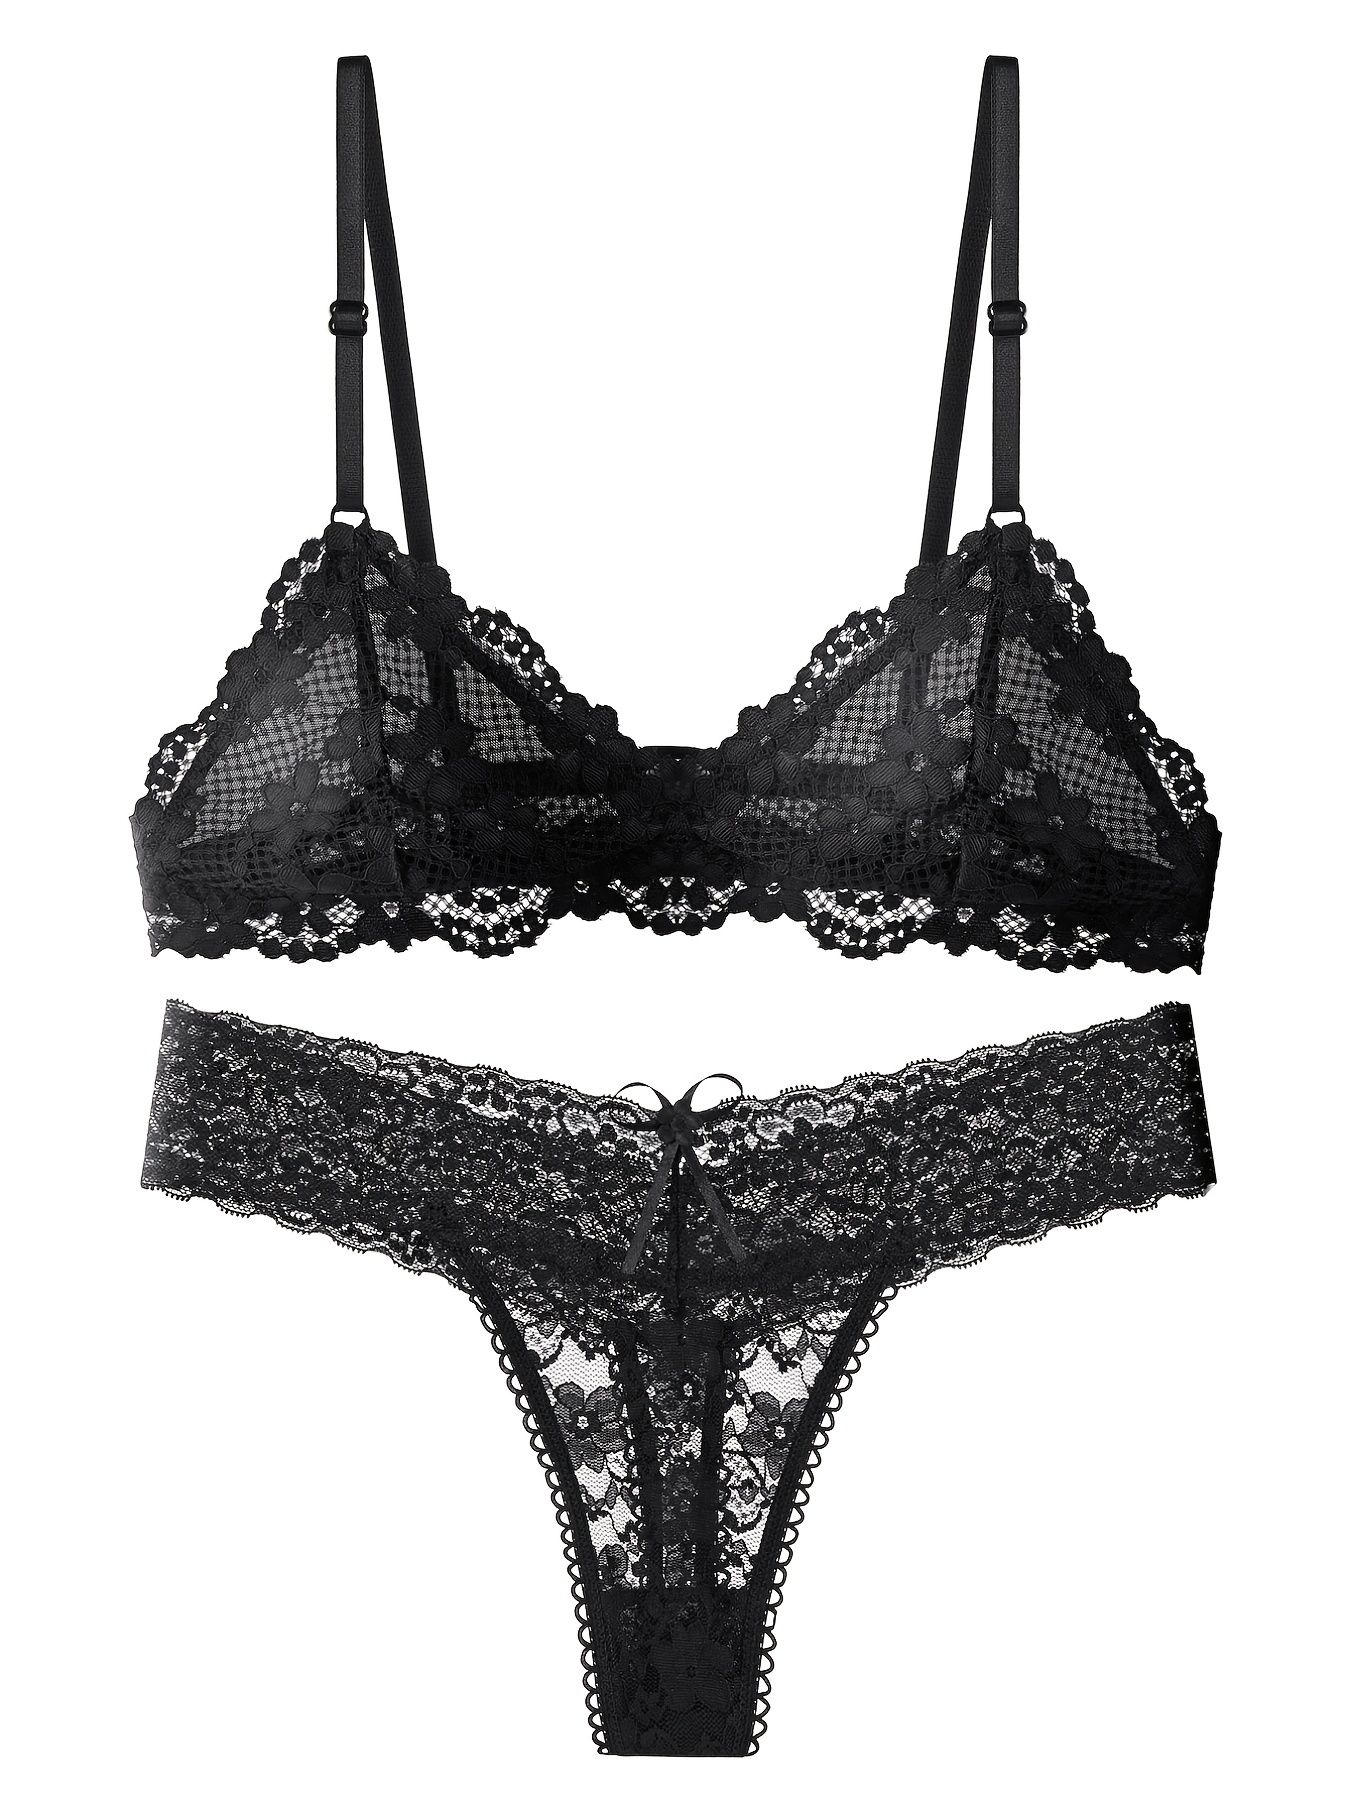 Floral Lace Unlined Triangle Bra, Black